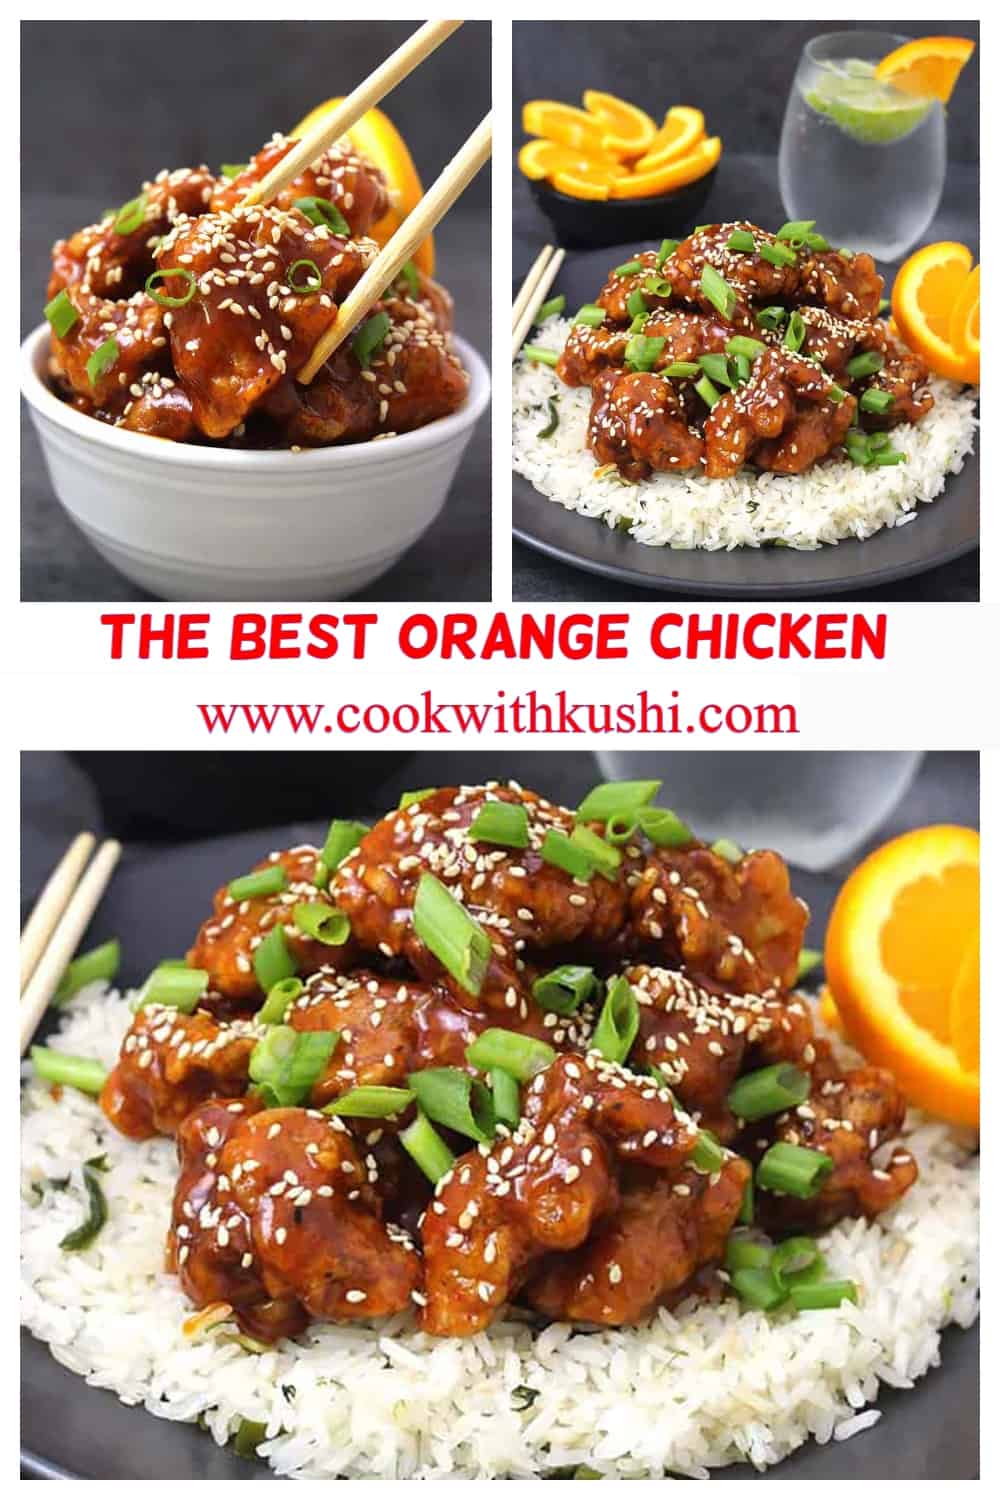 A collage of pics showing Crispy Orange chicken garnished with spring onions and toasted sesame seeds served over a bed of steamed rice.